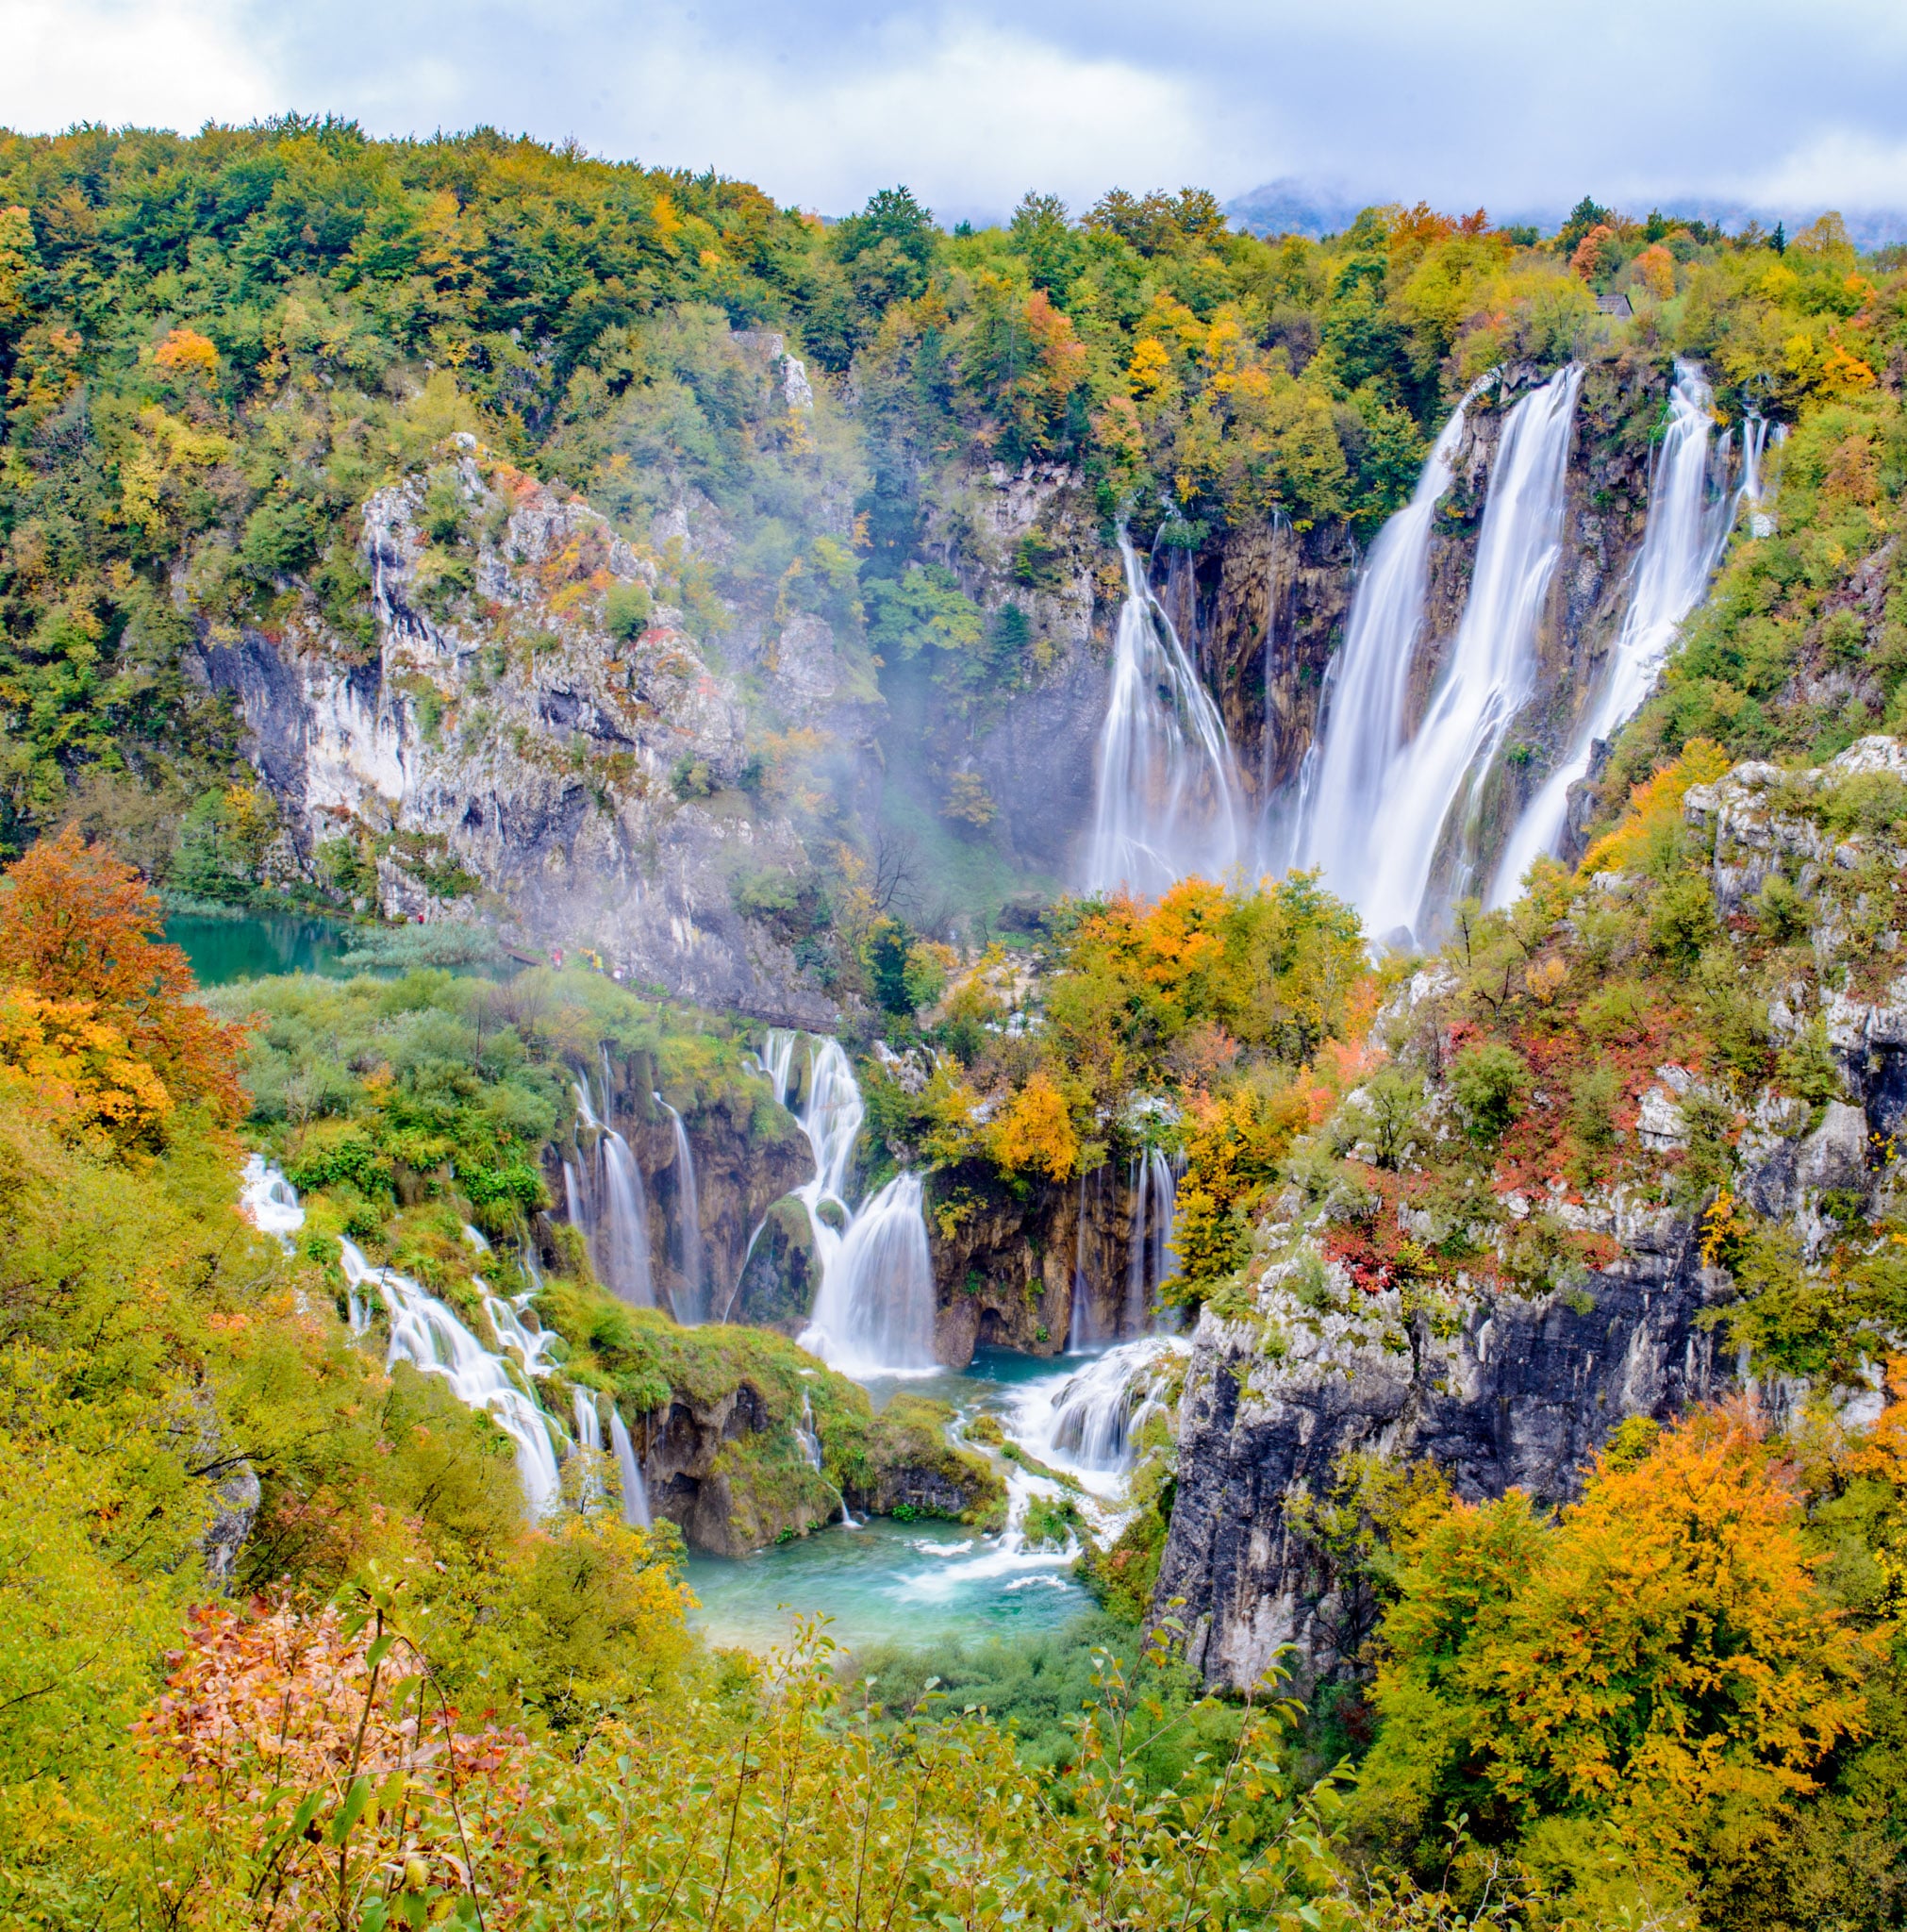 The Big Waterfall, also known as Veliki Slap, surrounded by autumn leaves as seen from just inside Entrance 1 of Plitvice Lakes National Park in Croatia.